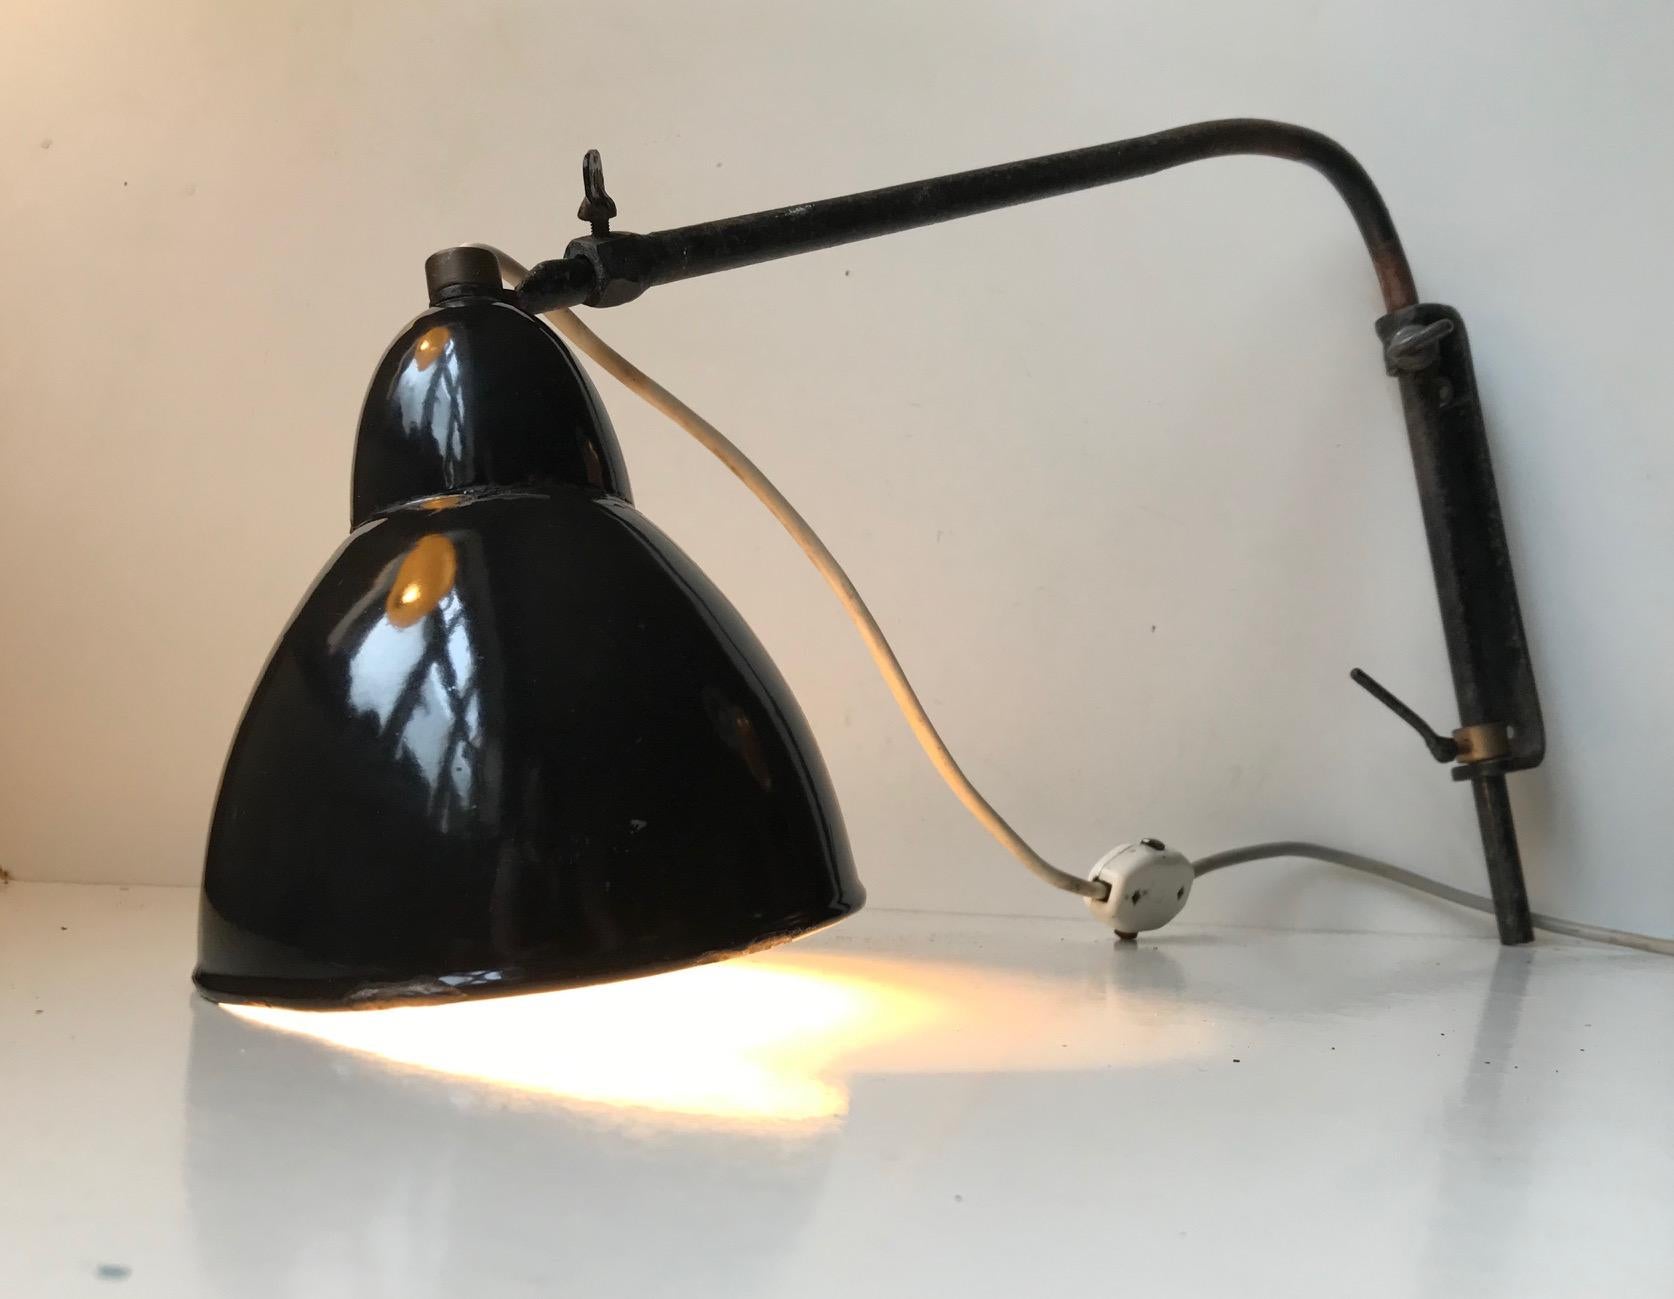 Extendable wall light with side-side, swing arm, adjustable mounts. This light has an Industrial provenance an it came out of a metal workshop in Leipzig Germany where it had been hanging, since 1930s. It has a reach/dept that are adjustable up to